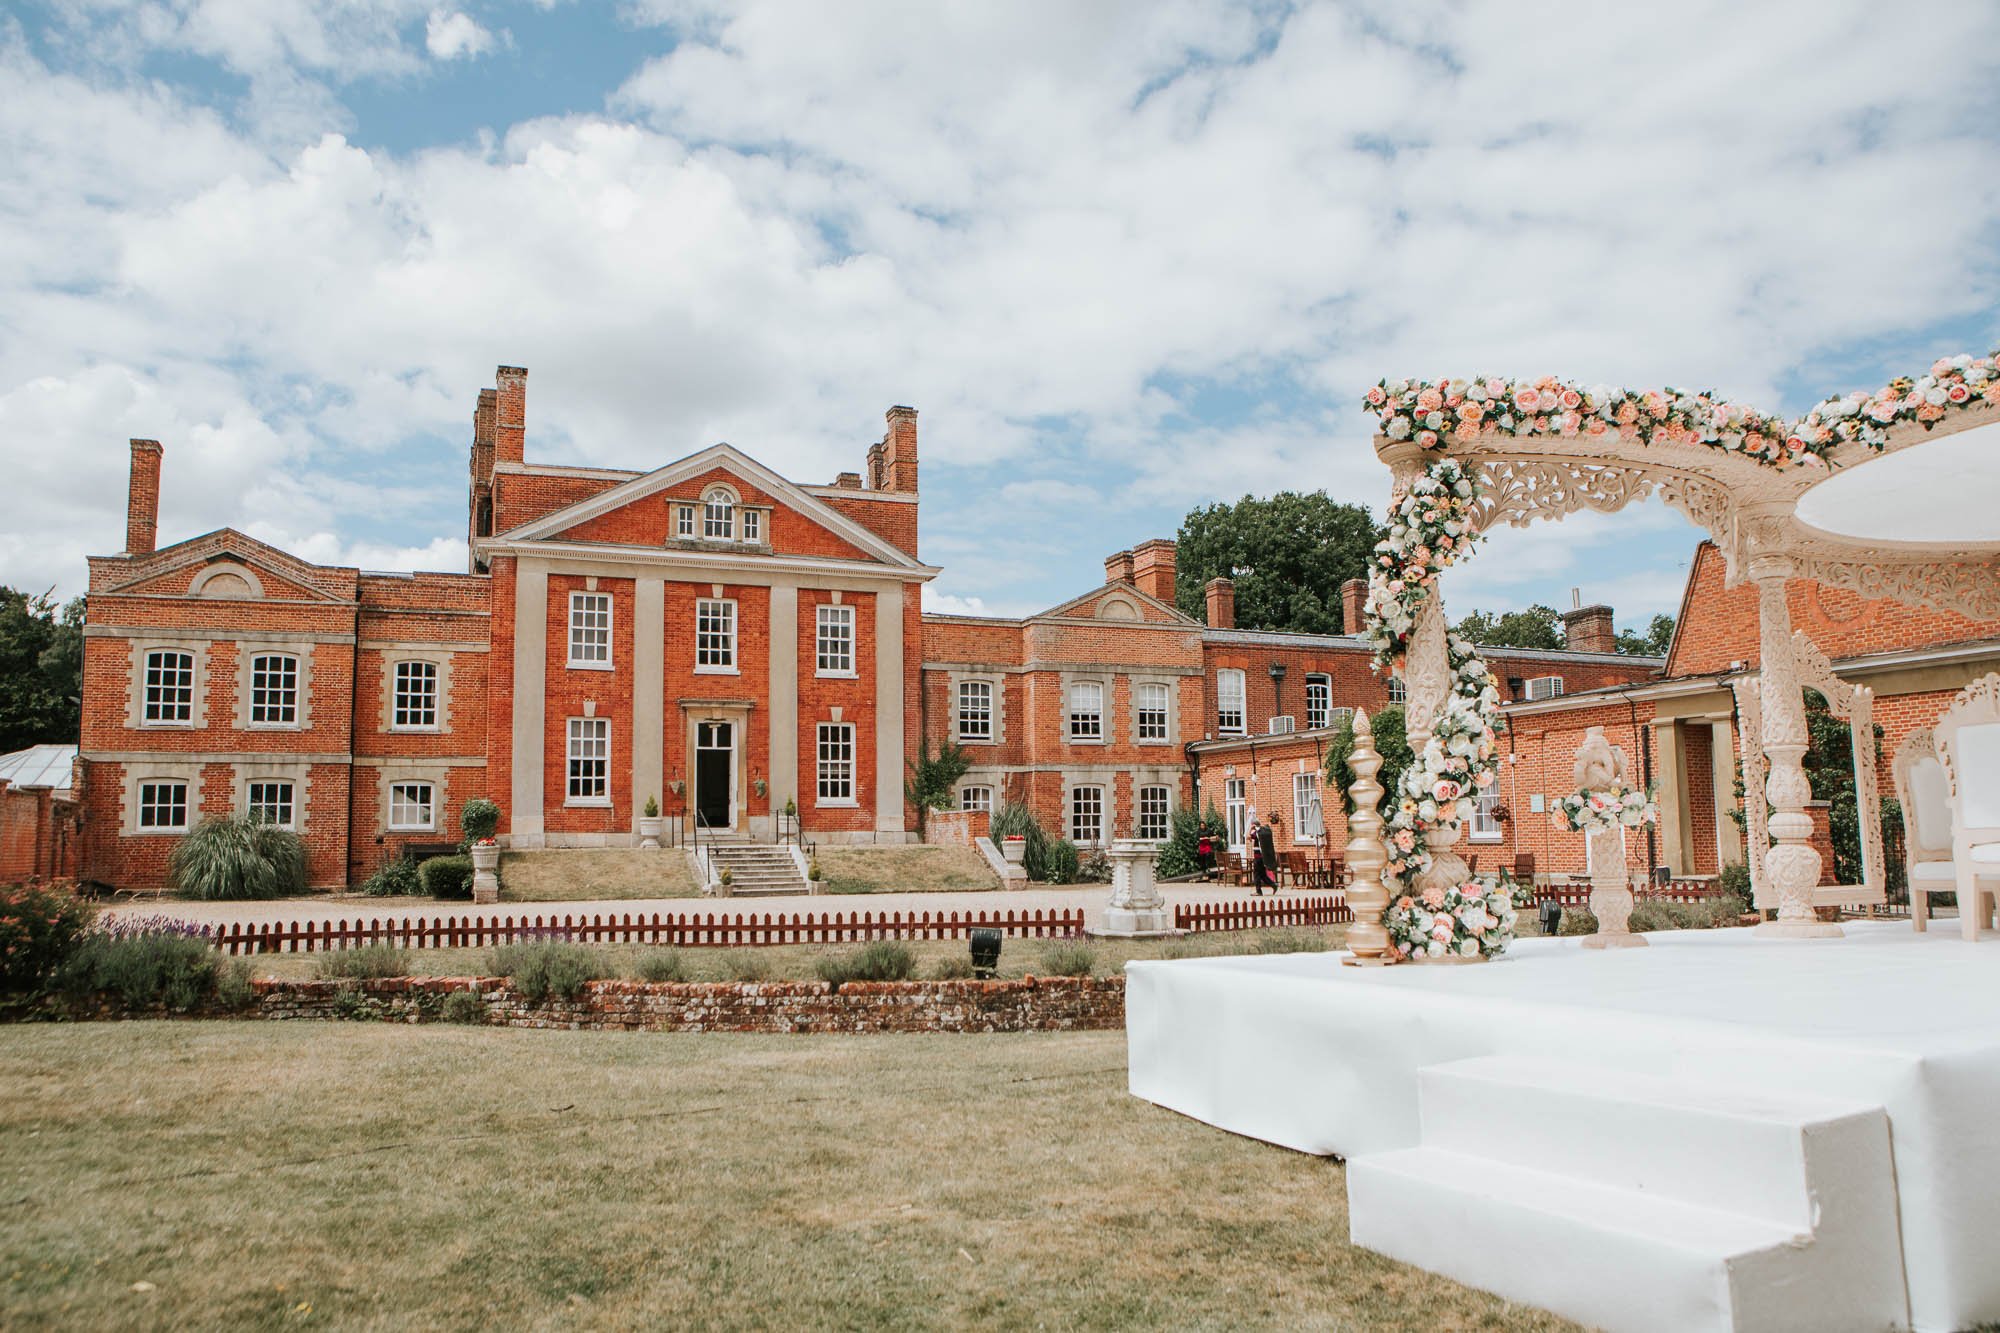  Designed by the renowned architect John James in 1724 Warbrook House is the ideal location for weddings and private parties and events. 